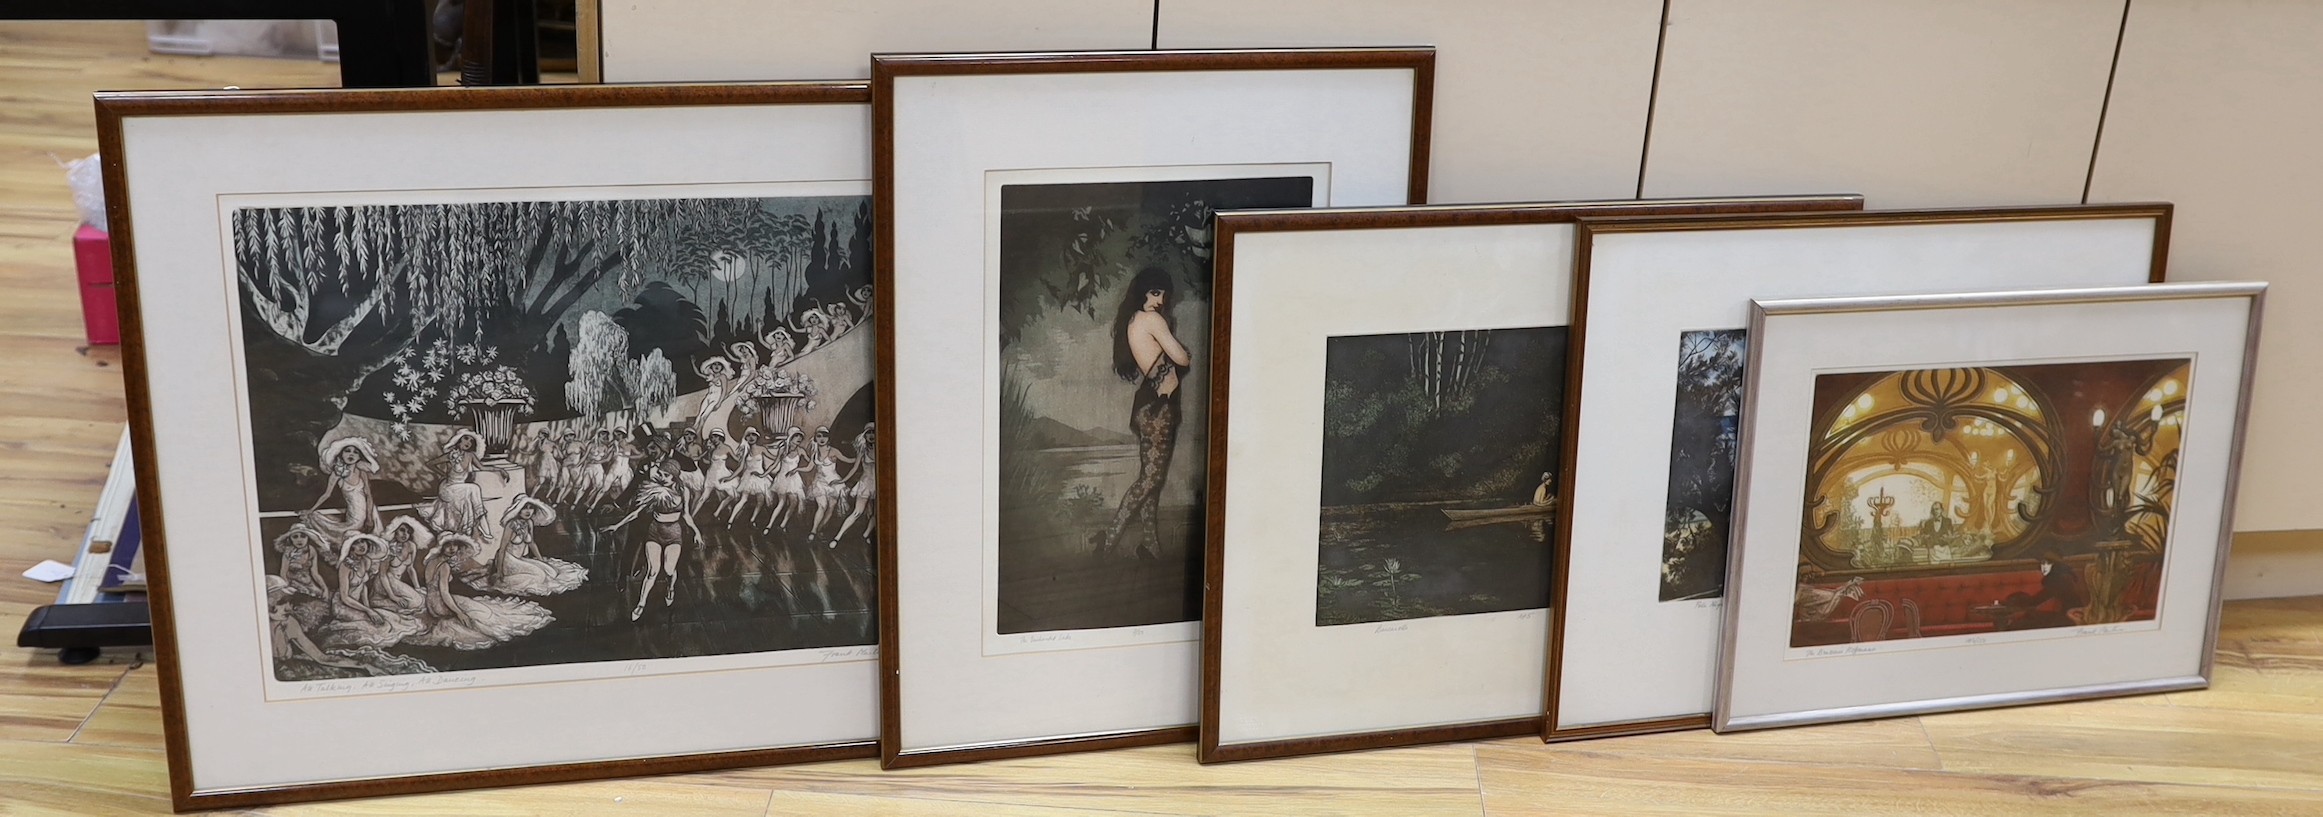 Frank Martin (1921-2005), five limited edition etchings with aquatint, 'All Talking All Singing', 'The Enchanted Lake', 'Barcaville', 'Polanegri' and 'The Brasserie Hoffmann', all signed in pencil and inscribed, largest